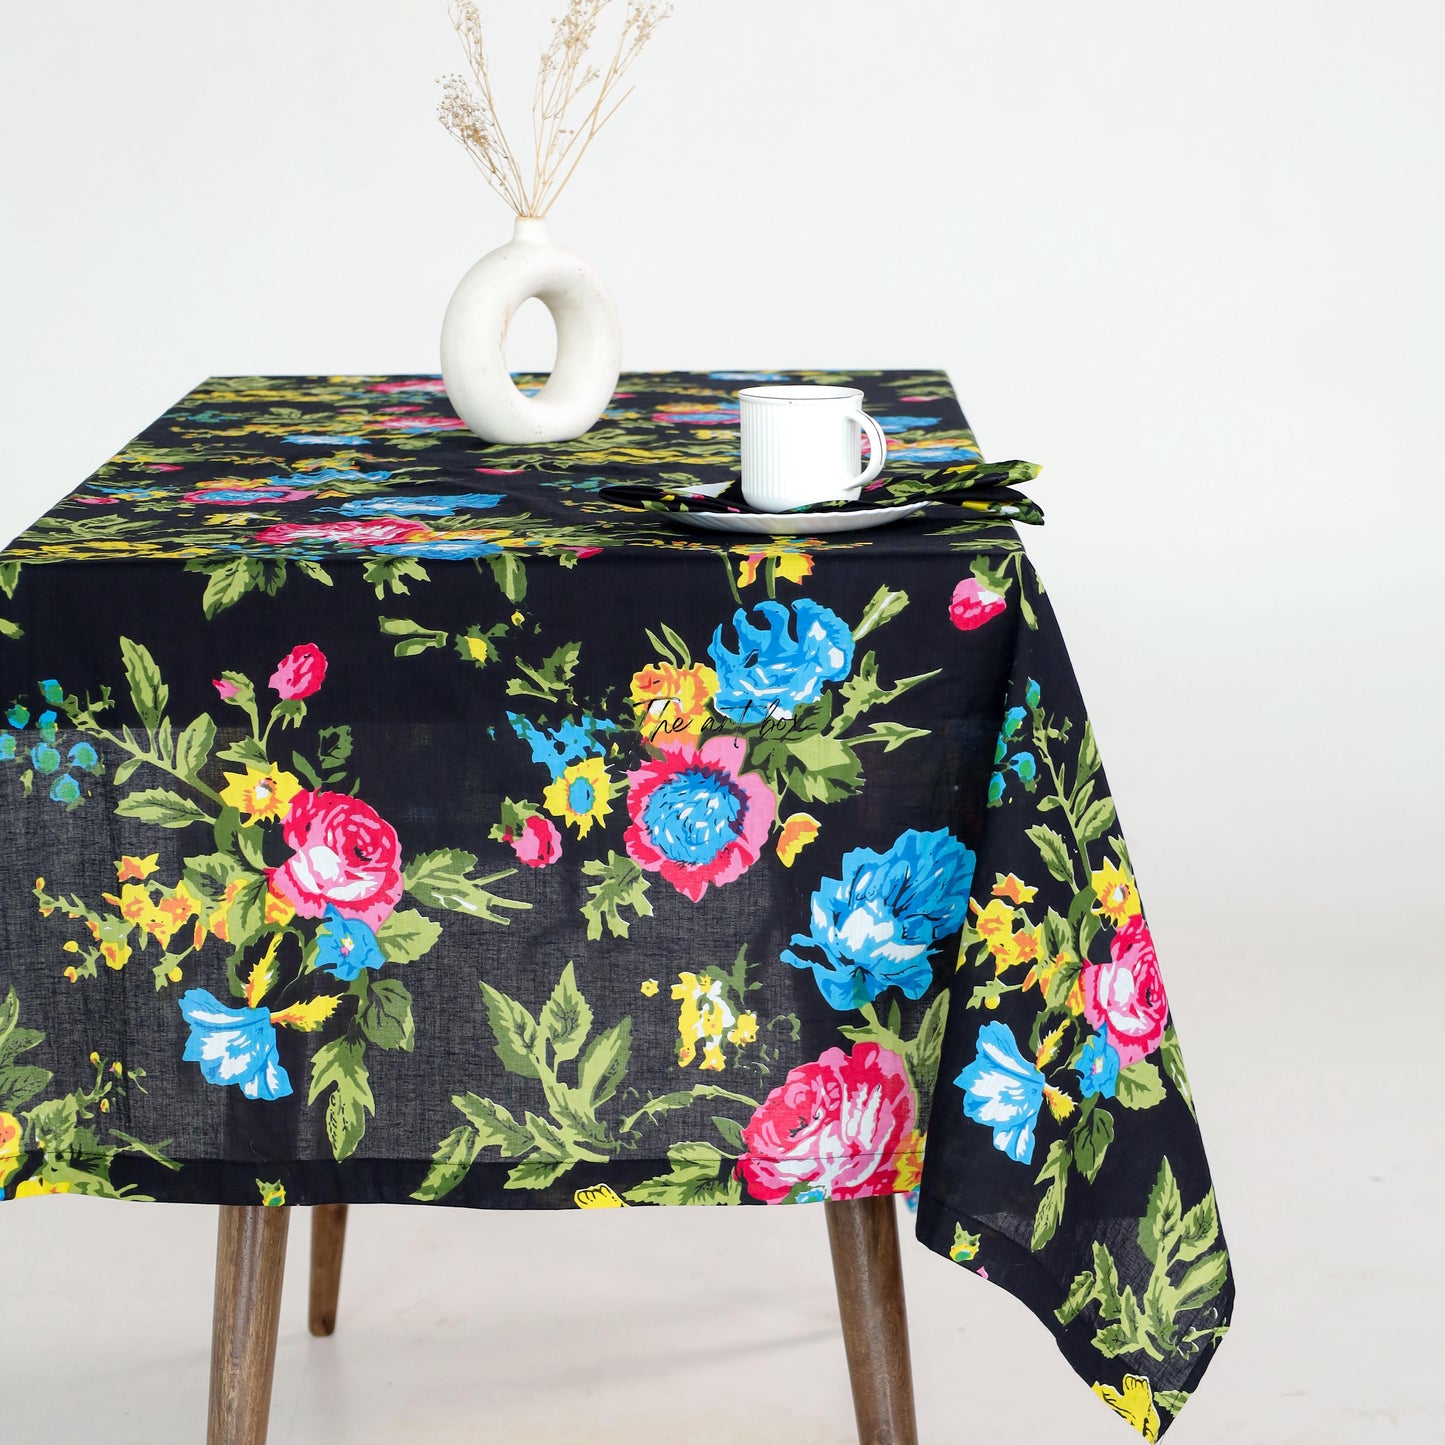 Every Time For Best Black Table Cloth, Floral Printed Cotton Table Cover